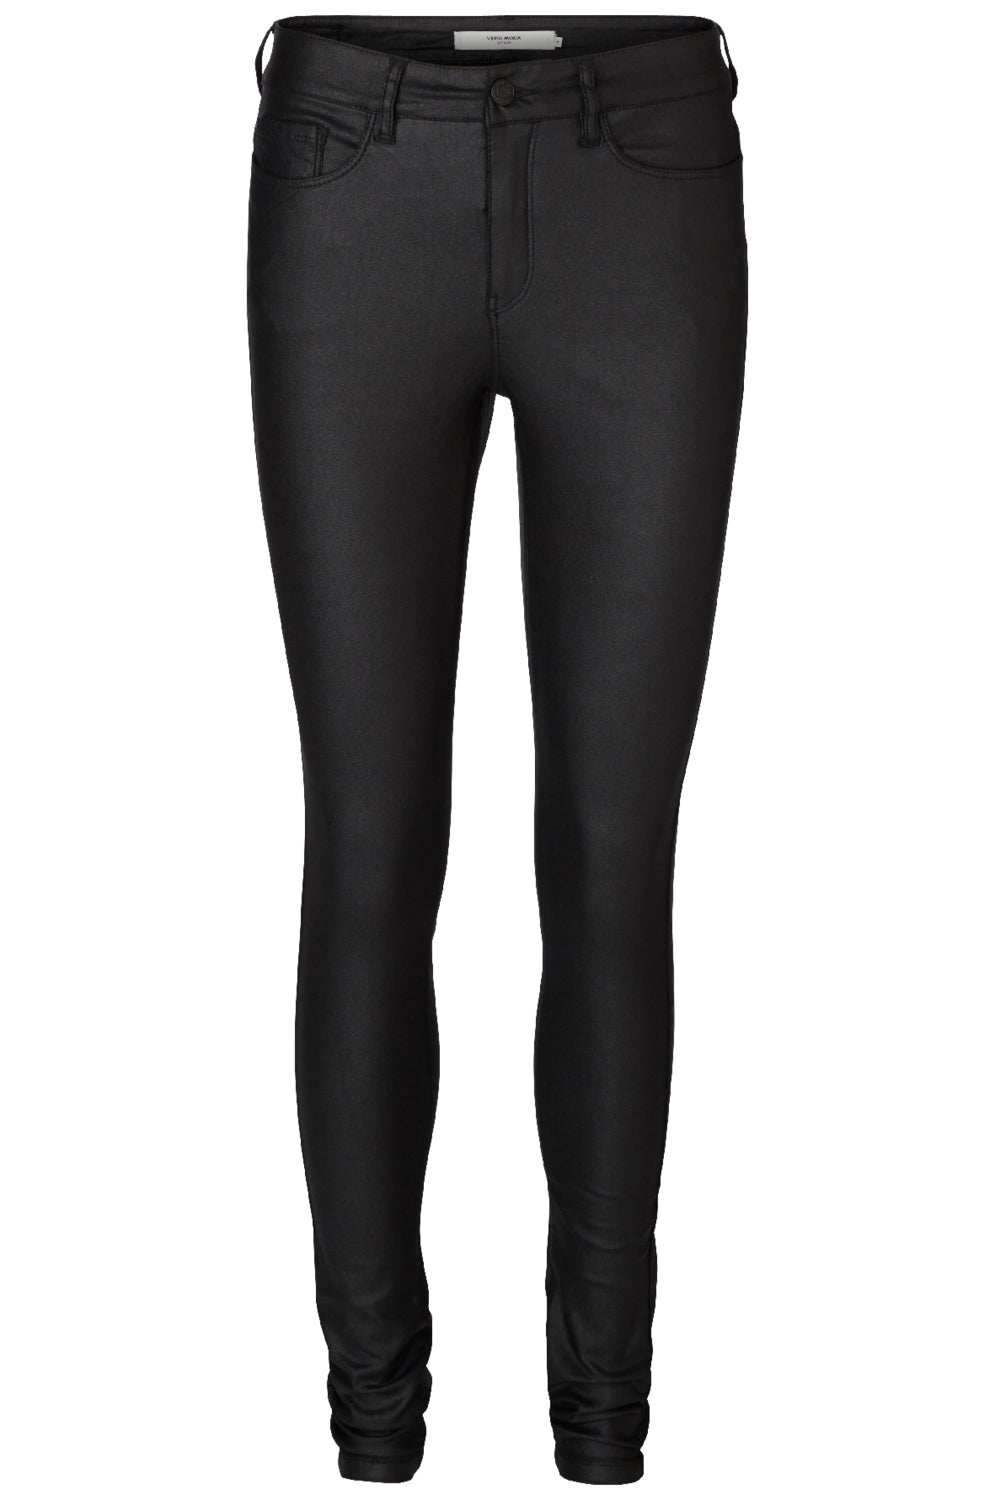 Vero Moda, Vmseven Nw Ss Smooth Coated Pants, Black COATED